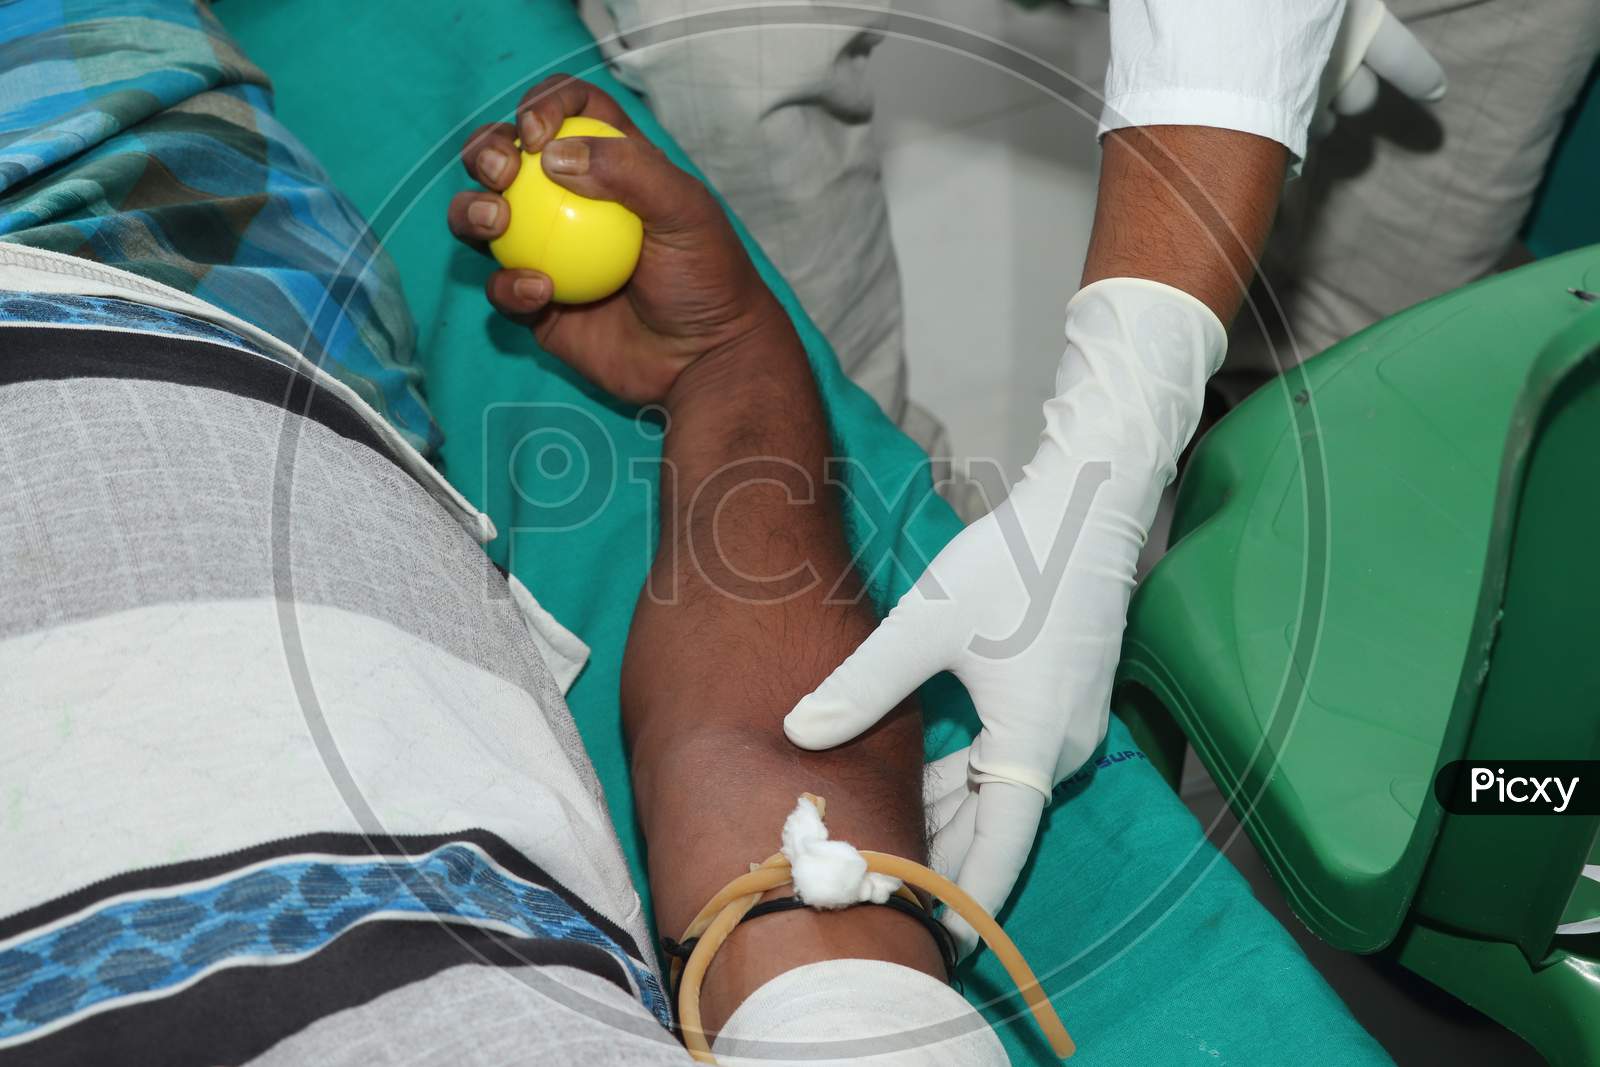 Blood Donor At Donation With A Bouncy Ball Holding In Hand Stock Photo